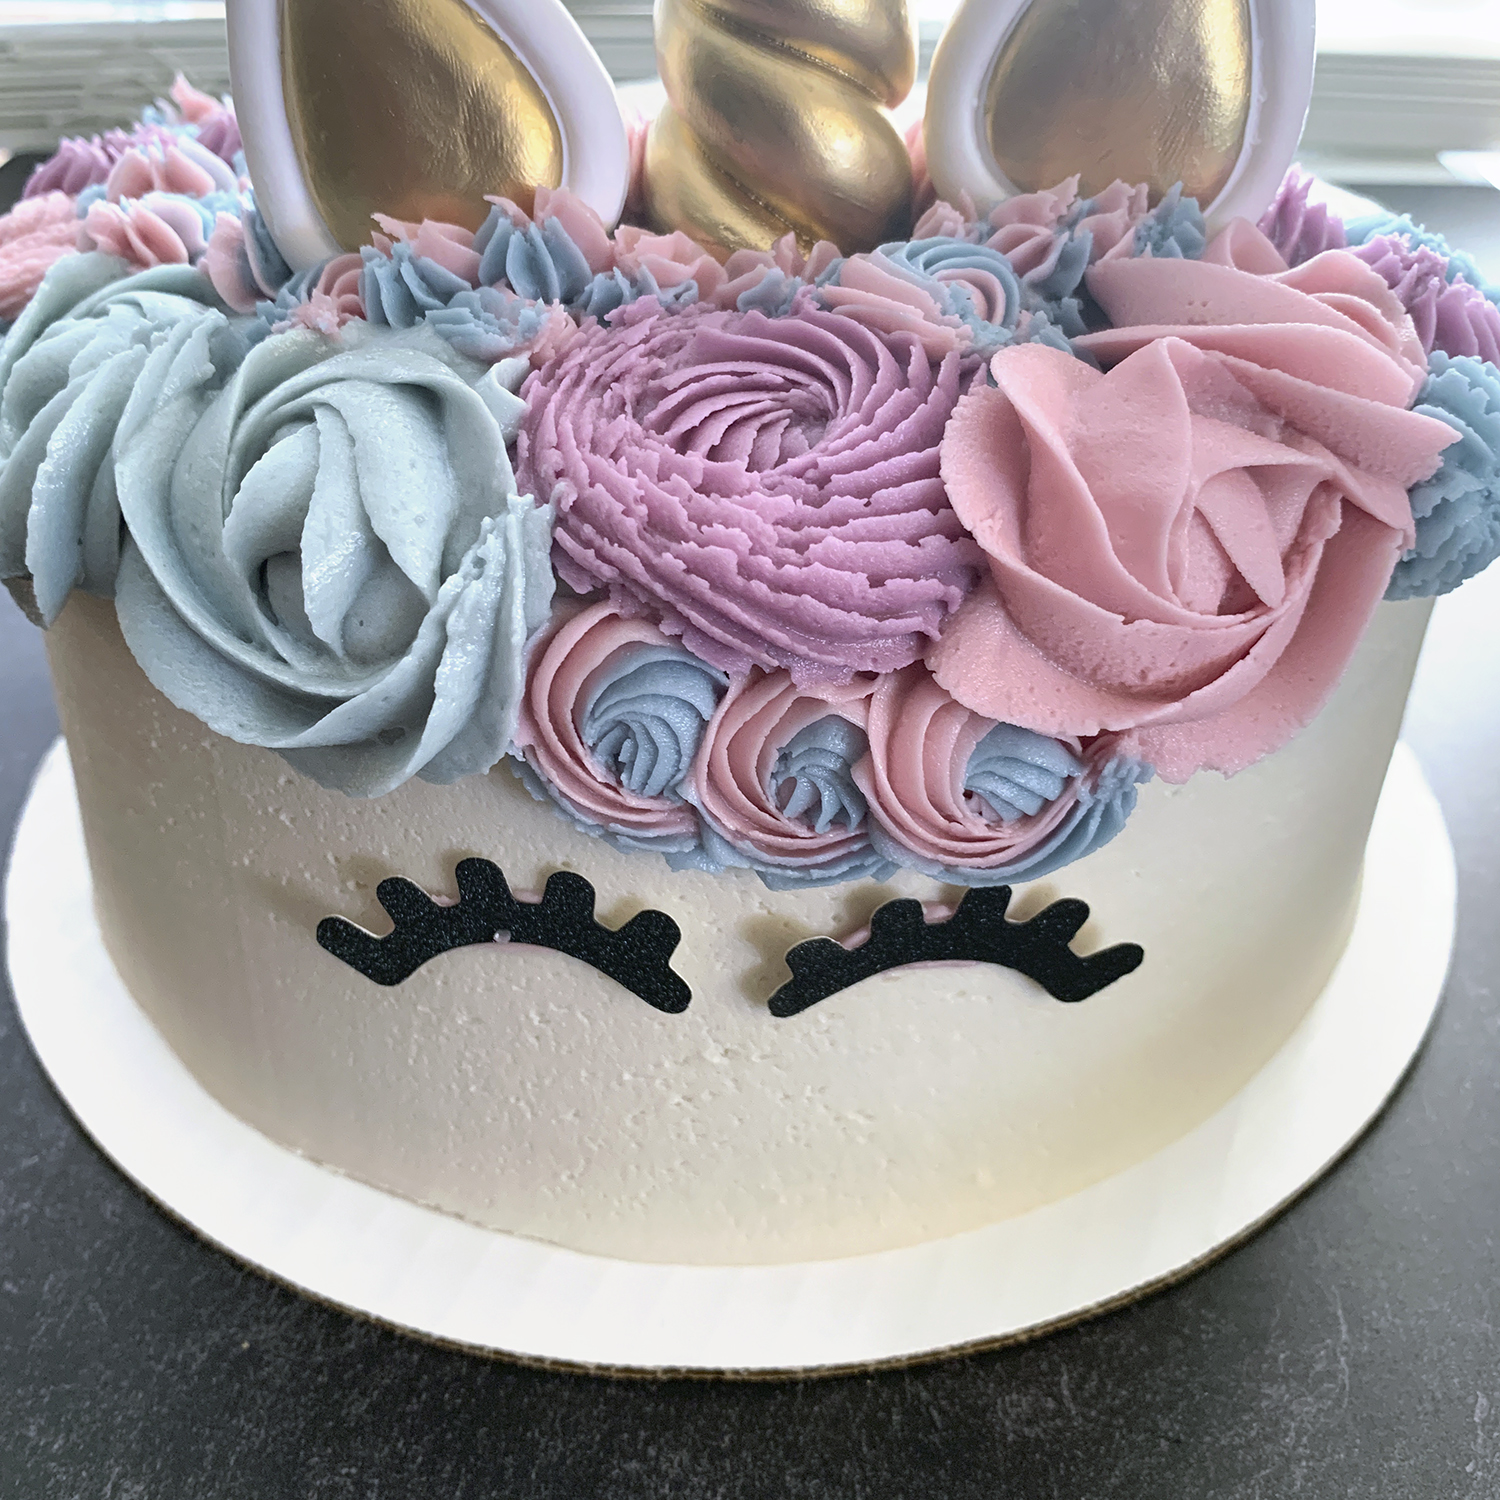 Unicorn Cake by The Allergy Chef